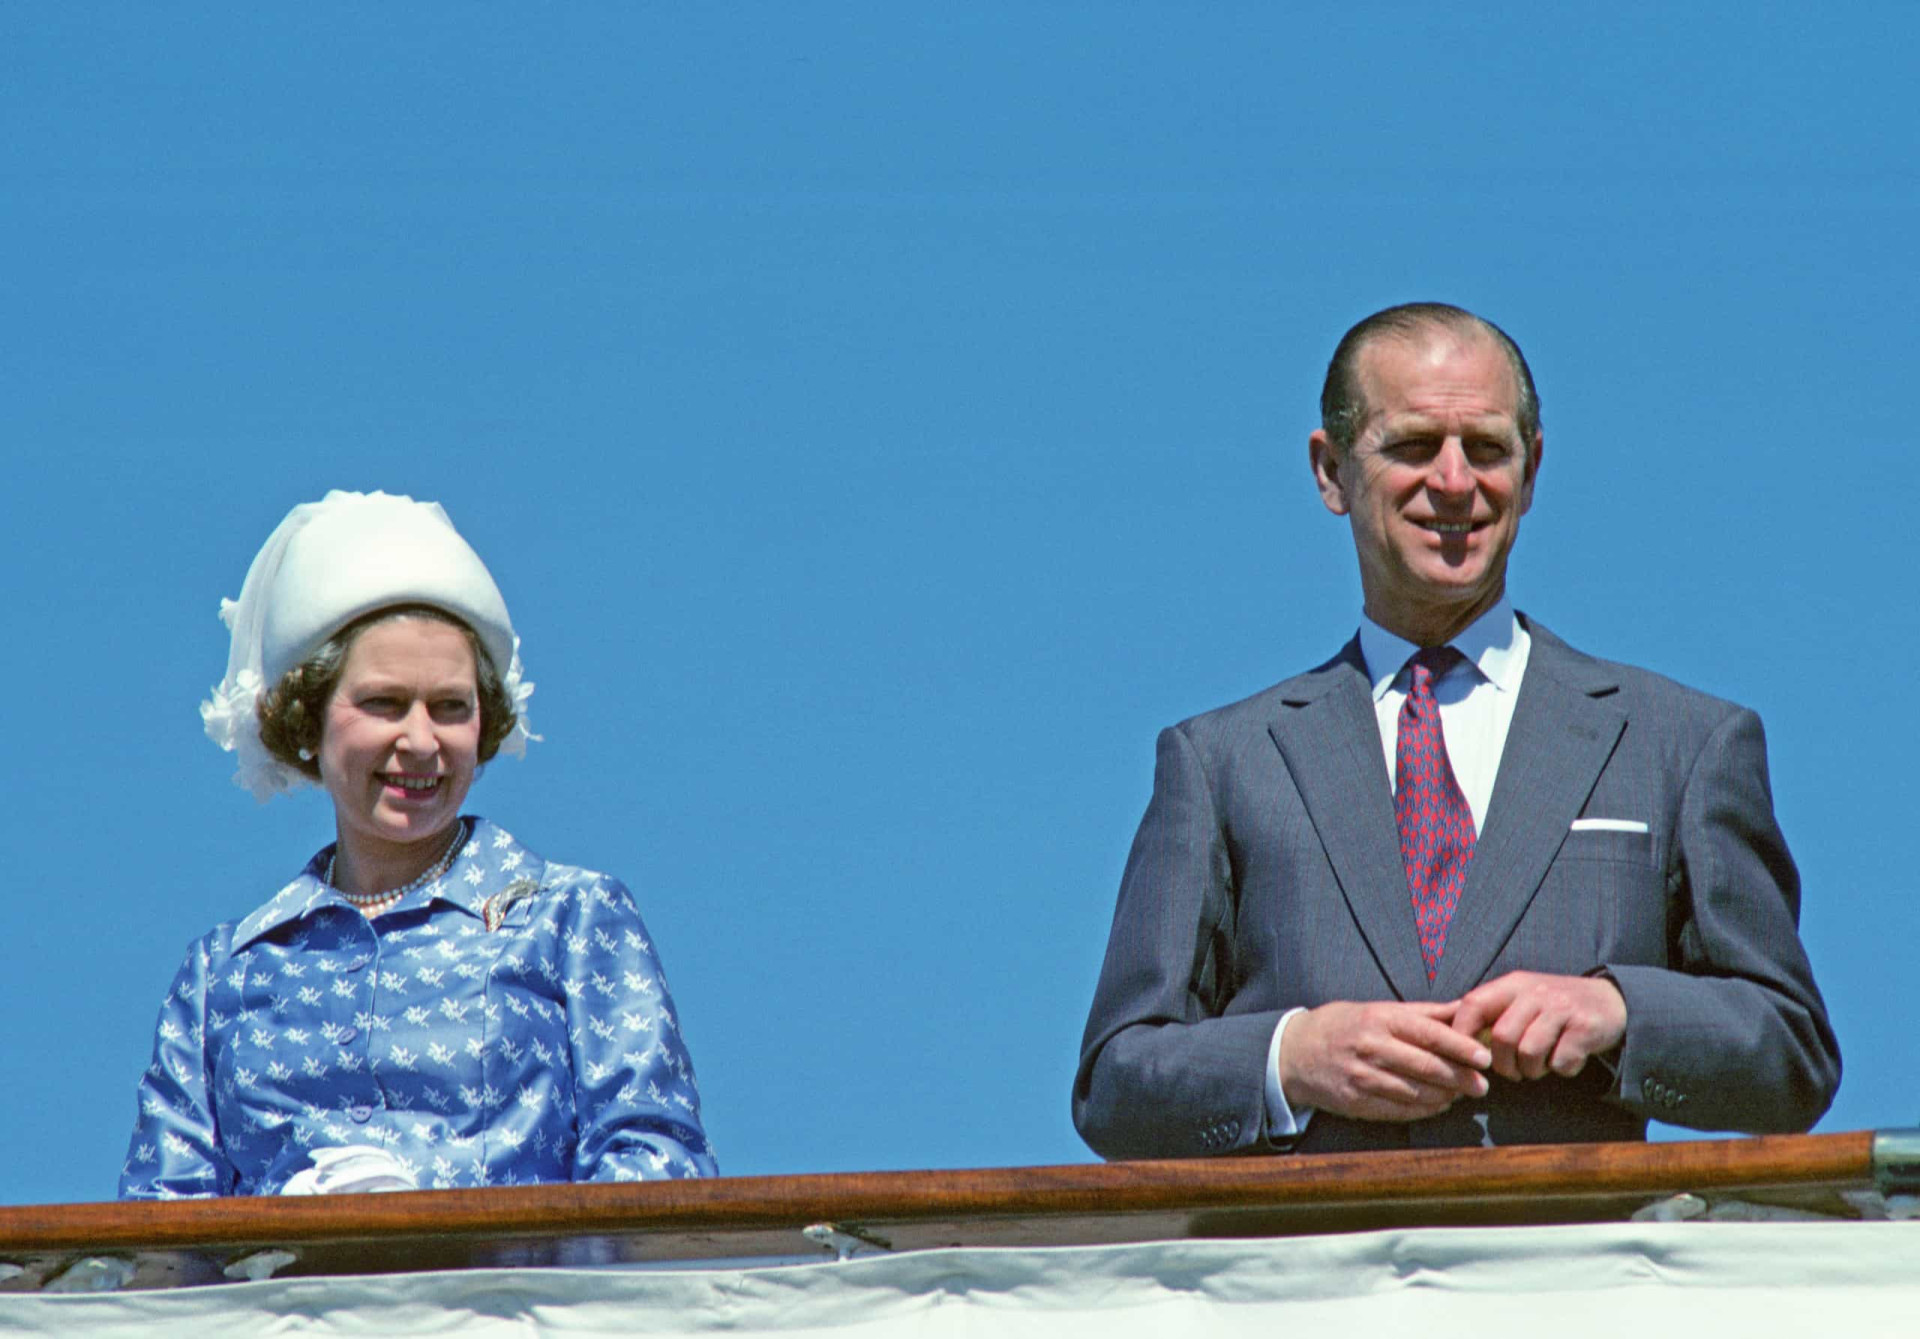 <p>A six-nation tour of the Gulf States, the first ever by a female Head of State, took place in early 1979. The Queen and Prince Philip flew into the region before setting sail from Kuwait aboard <em>Britannia</em>.</p><p><a href="https://www.msn.com/en-sg/community/channel/vid-7xx8mnucu55yw63we9va2gwr7uihbxwc68fxqp25x6tg4ftibpra?cvid=94631541bc0f4f89bfd59158d696ad7e">Follow us and access great exclusive content every day</a></p>